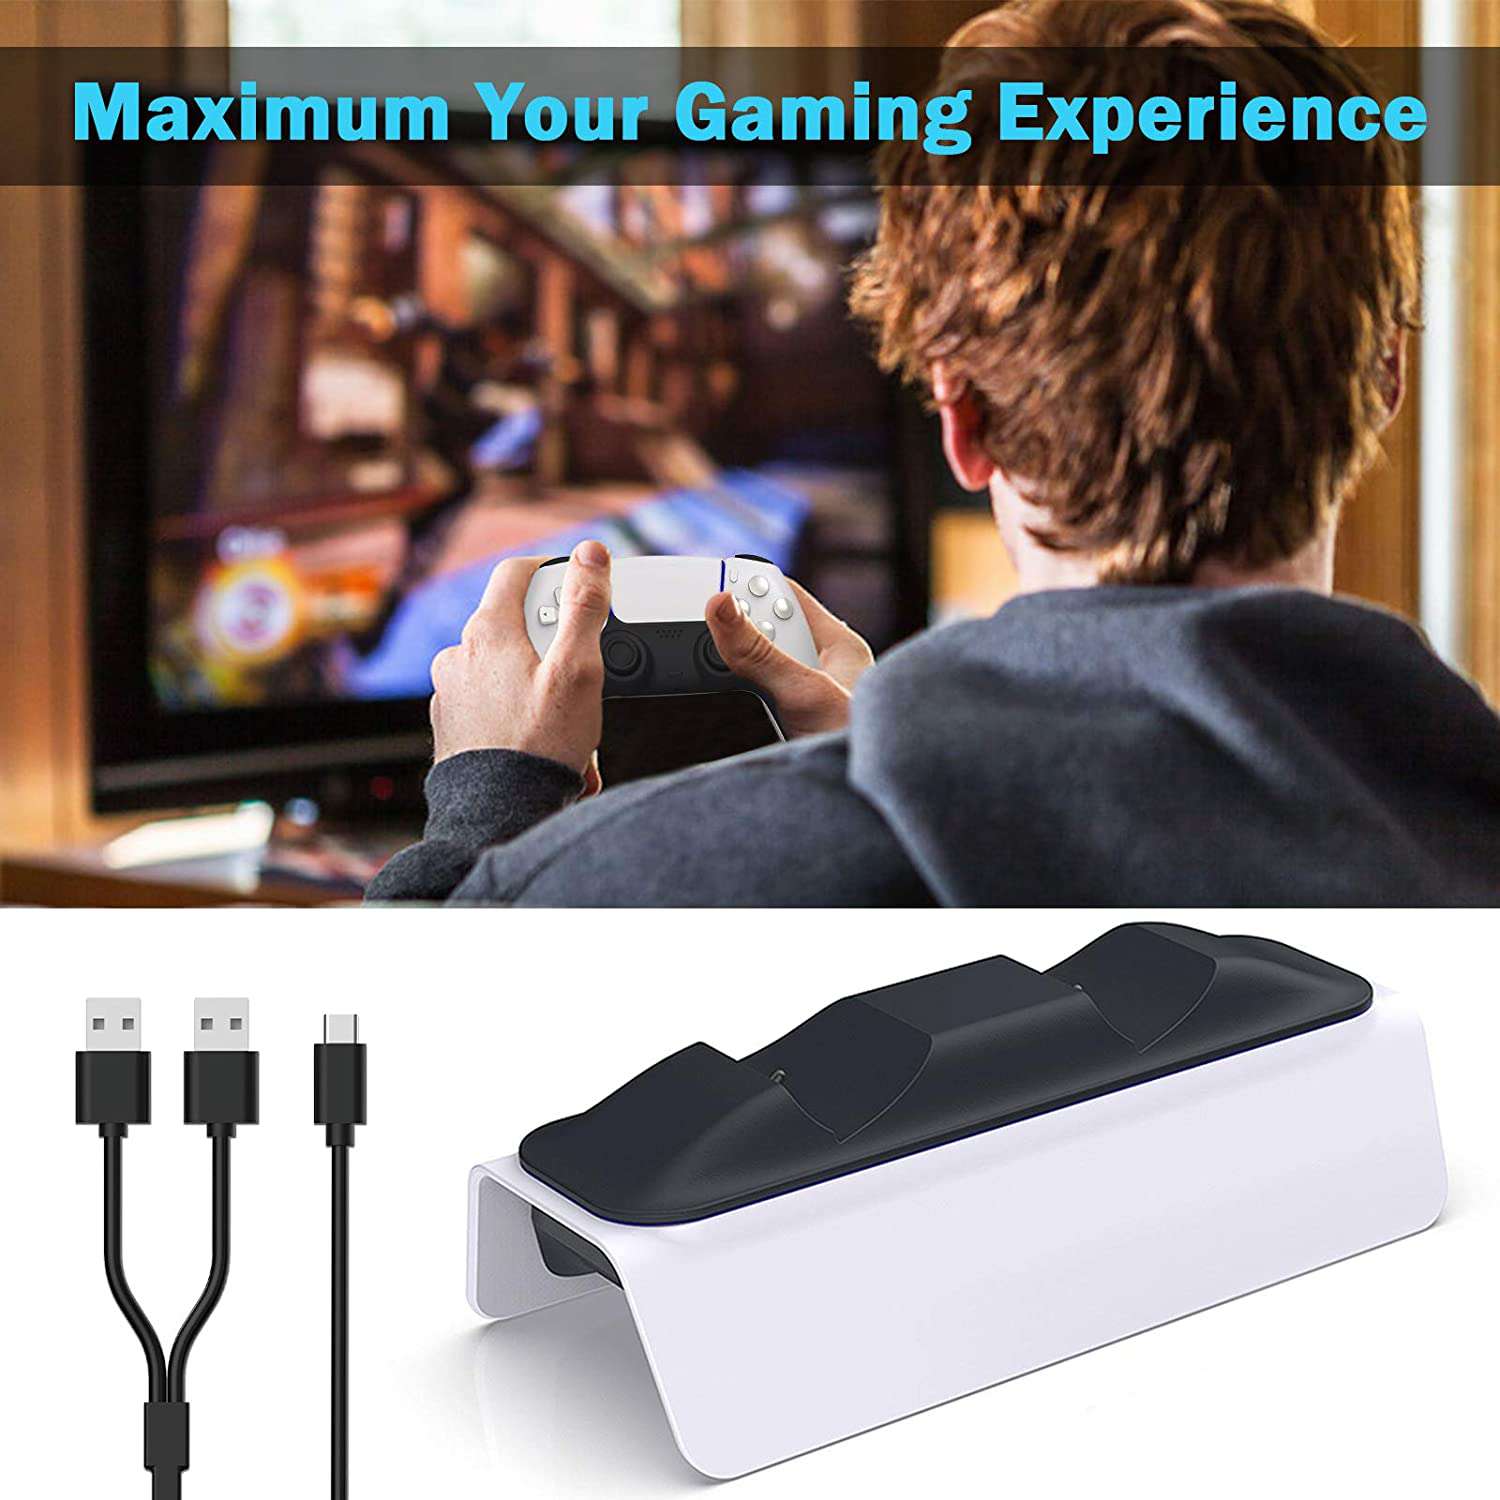 A gamer is enjoying PS5 games with charging station, enhancing the gaming experience.